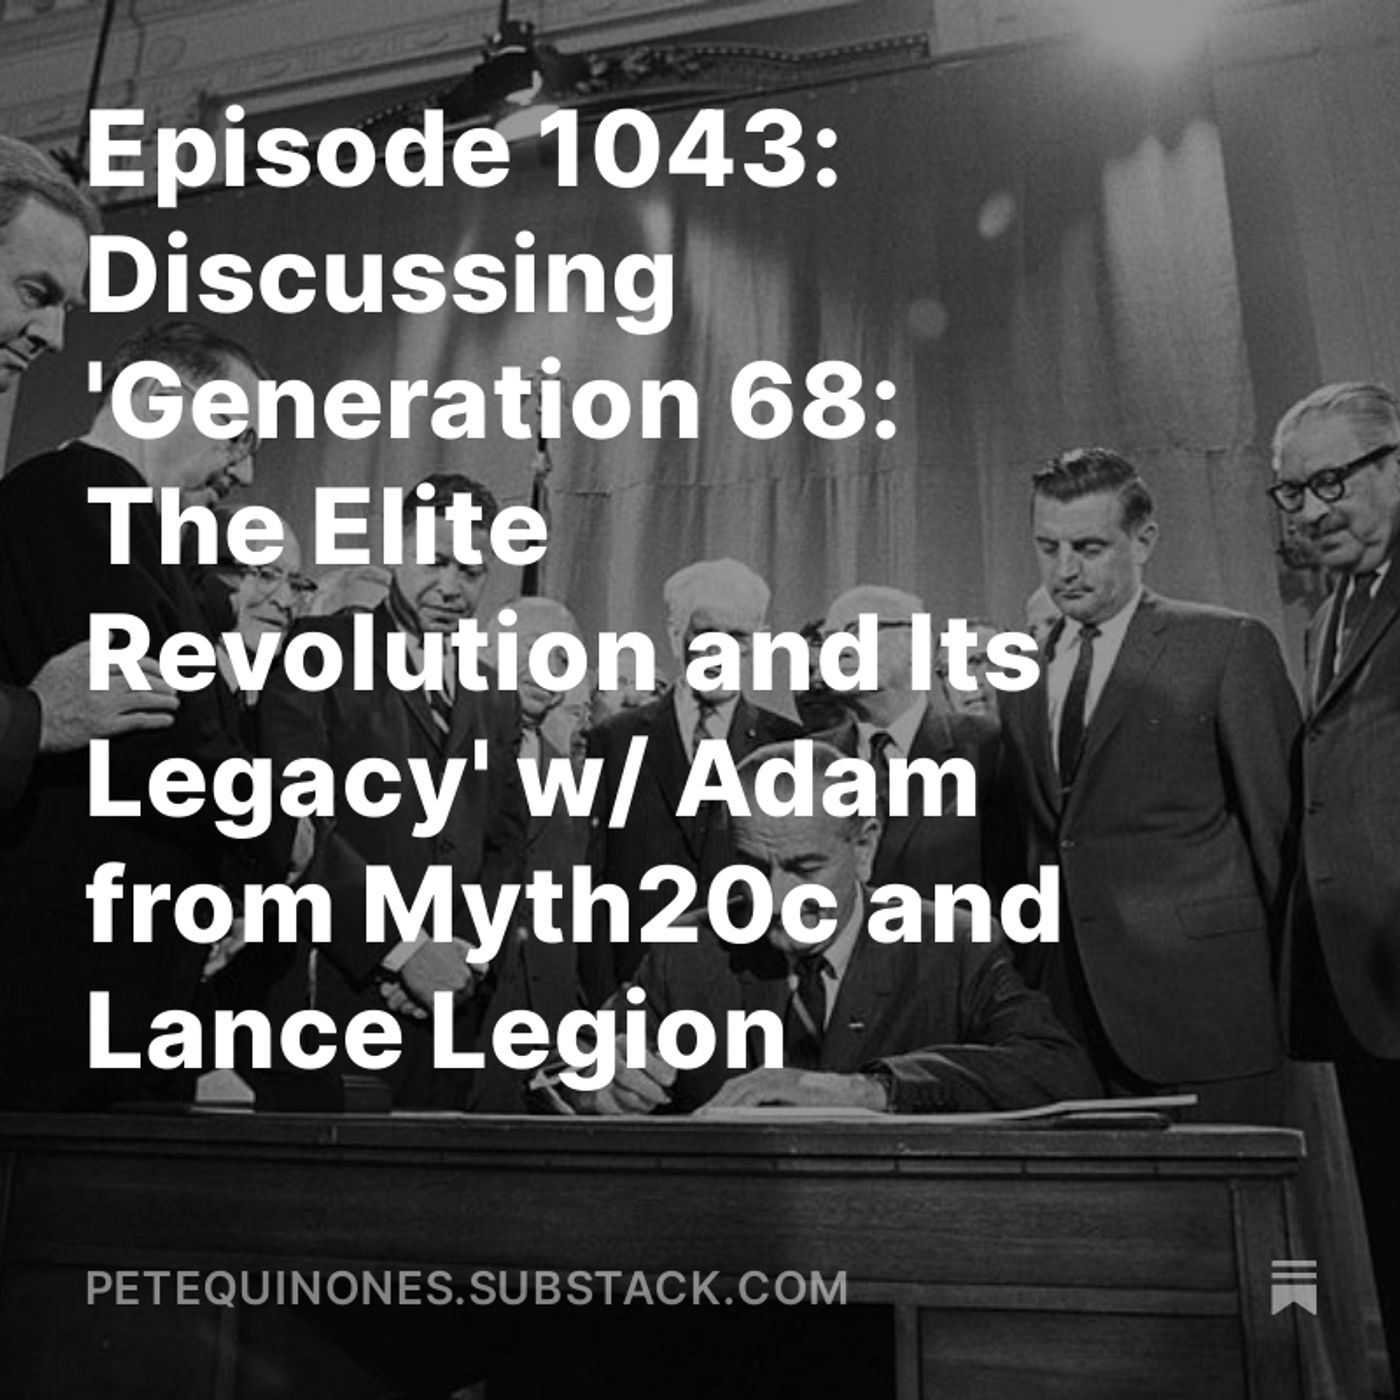 Episode 1043: Discussing ’Generation 68: The Elite Revolution and Its Legacy’ w/ Adam from Myth20c and Lance Legion